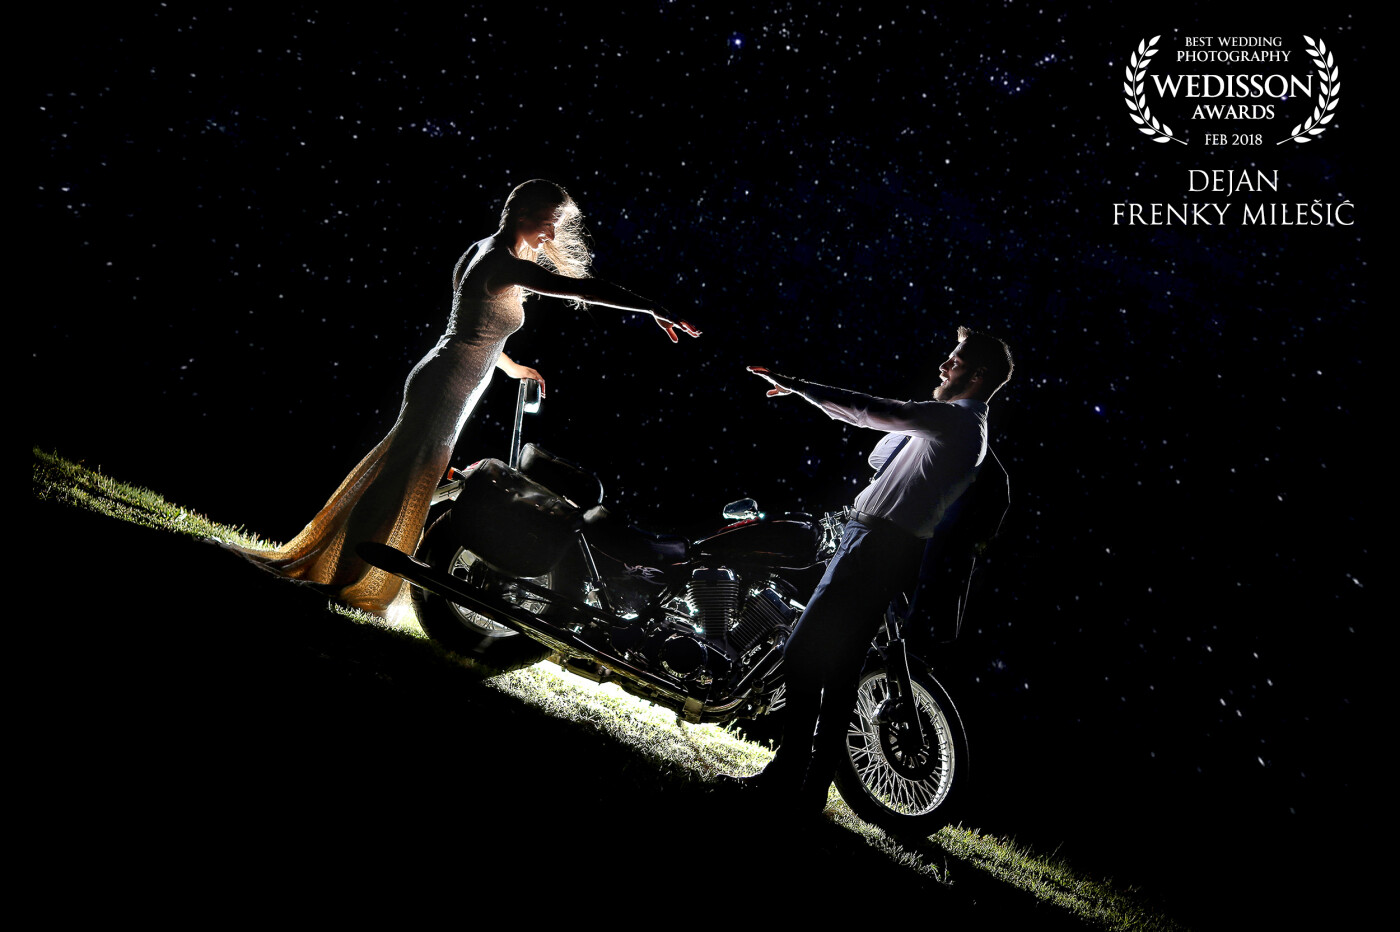 I am a wedding photographer who loves to drive a motorcycle. A couple of lovely people who had a wedding, asked me to bring my motorcycle and make a photo that will be "WOW". The sky was wonderful, a lot of stars, they were just wonderful, it was enough to touch, signal to create this magic :P